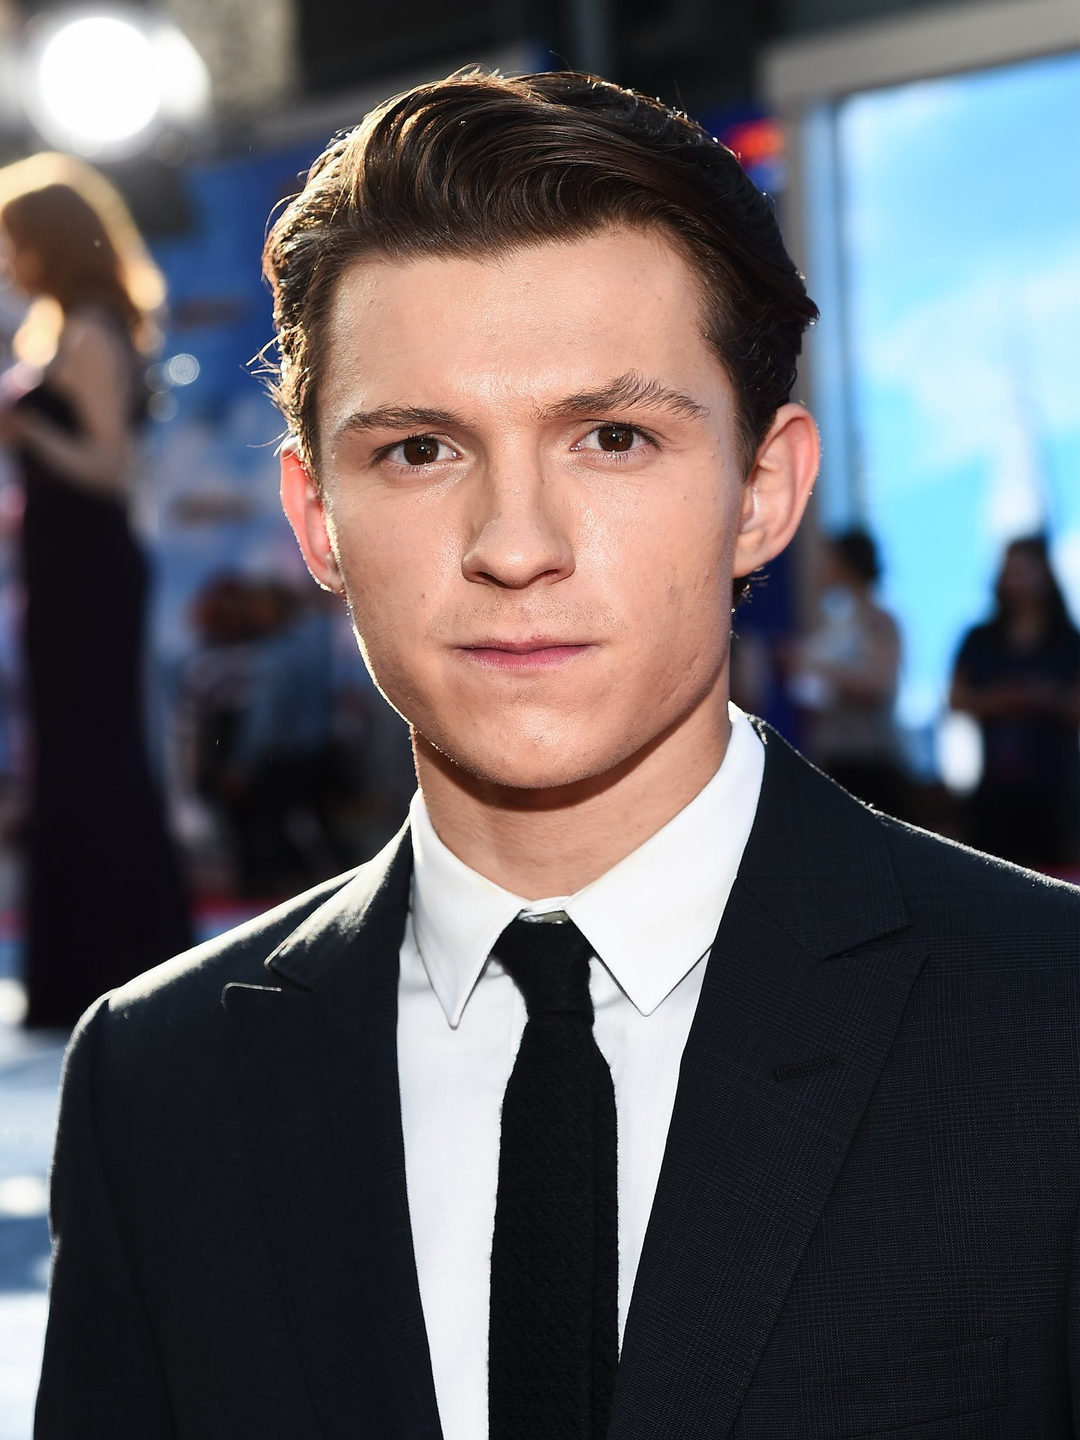 Tom Holland does he have a wife